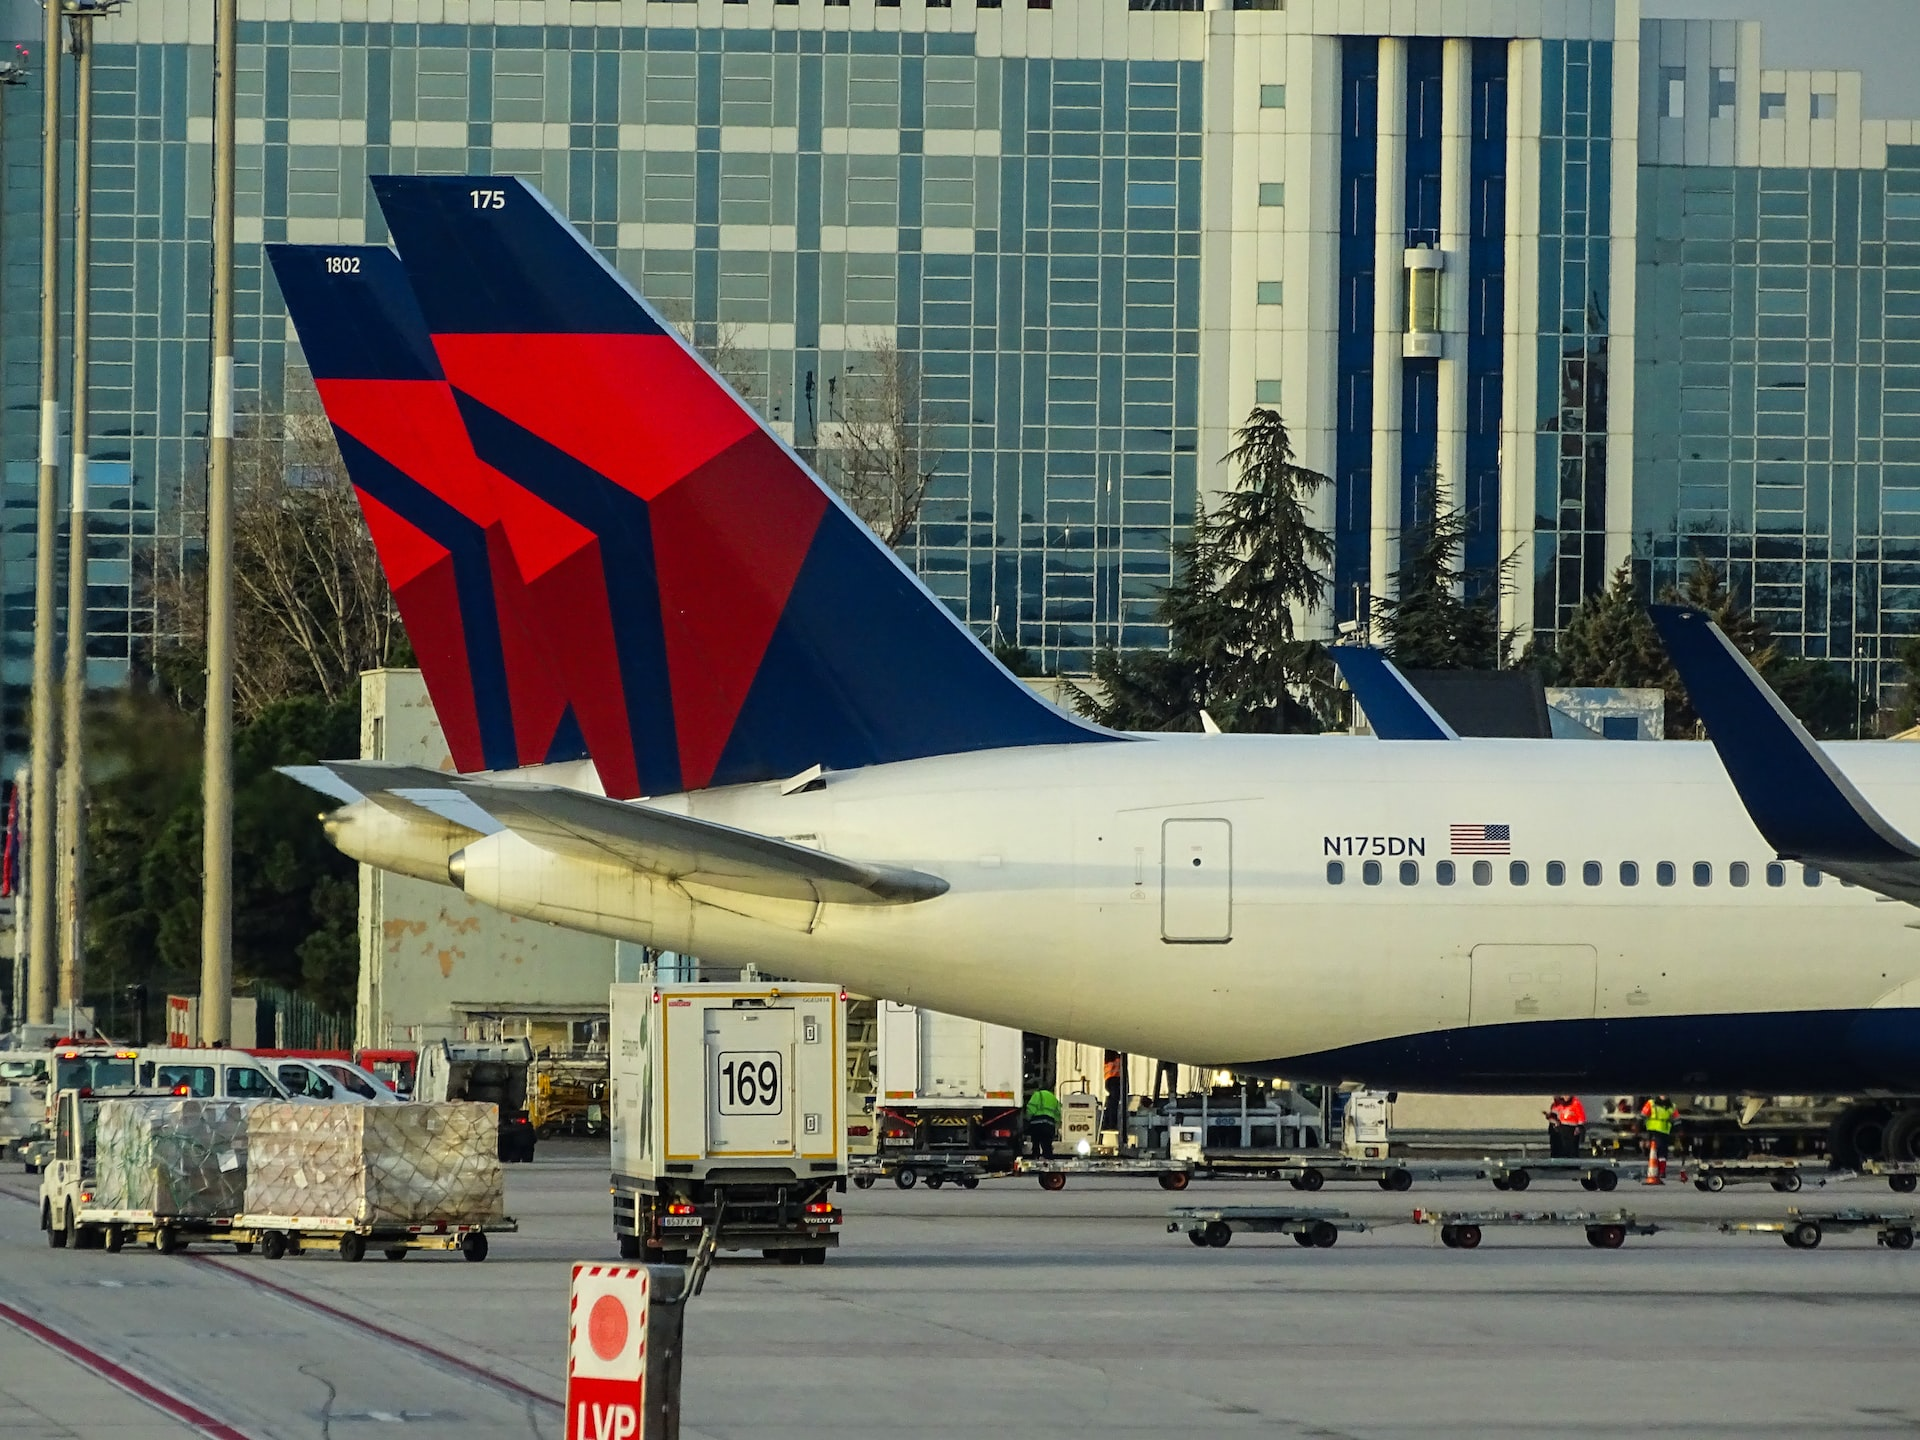 Legacy carrier Delta's aircraft tails.